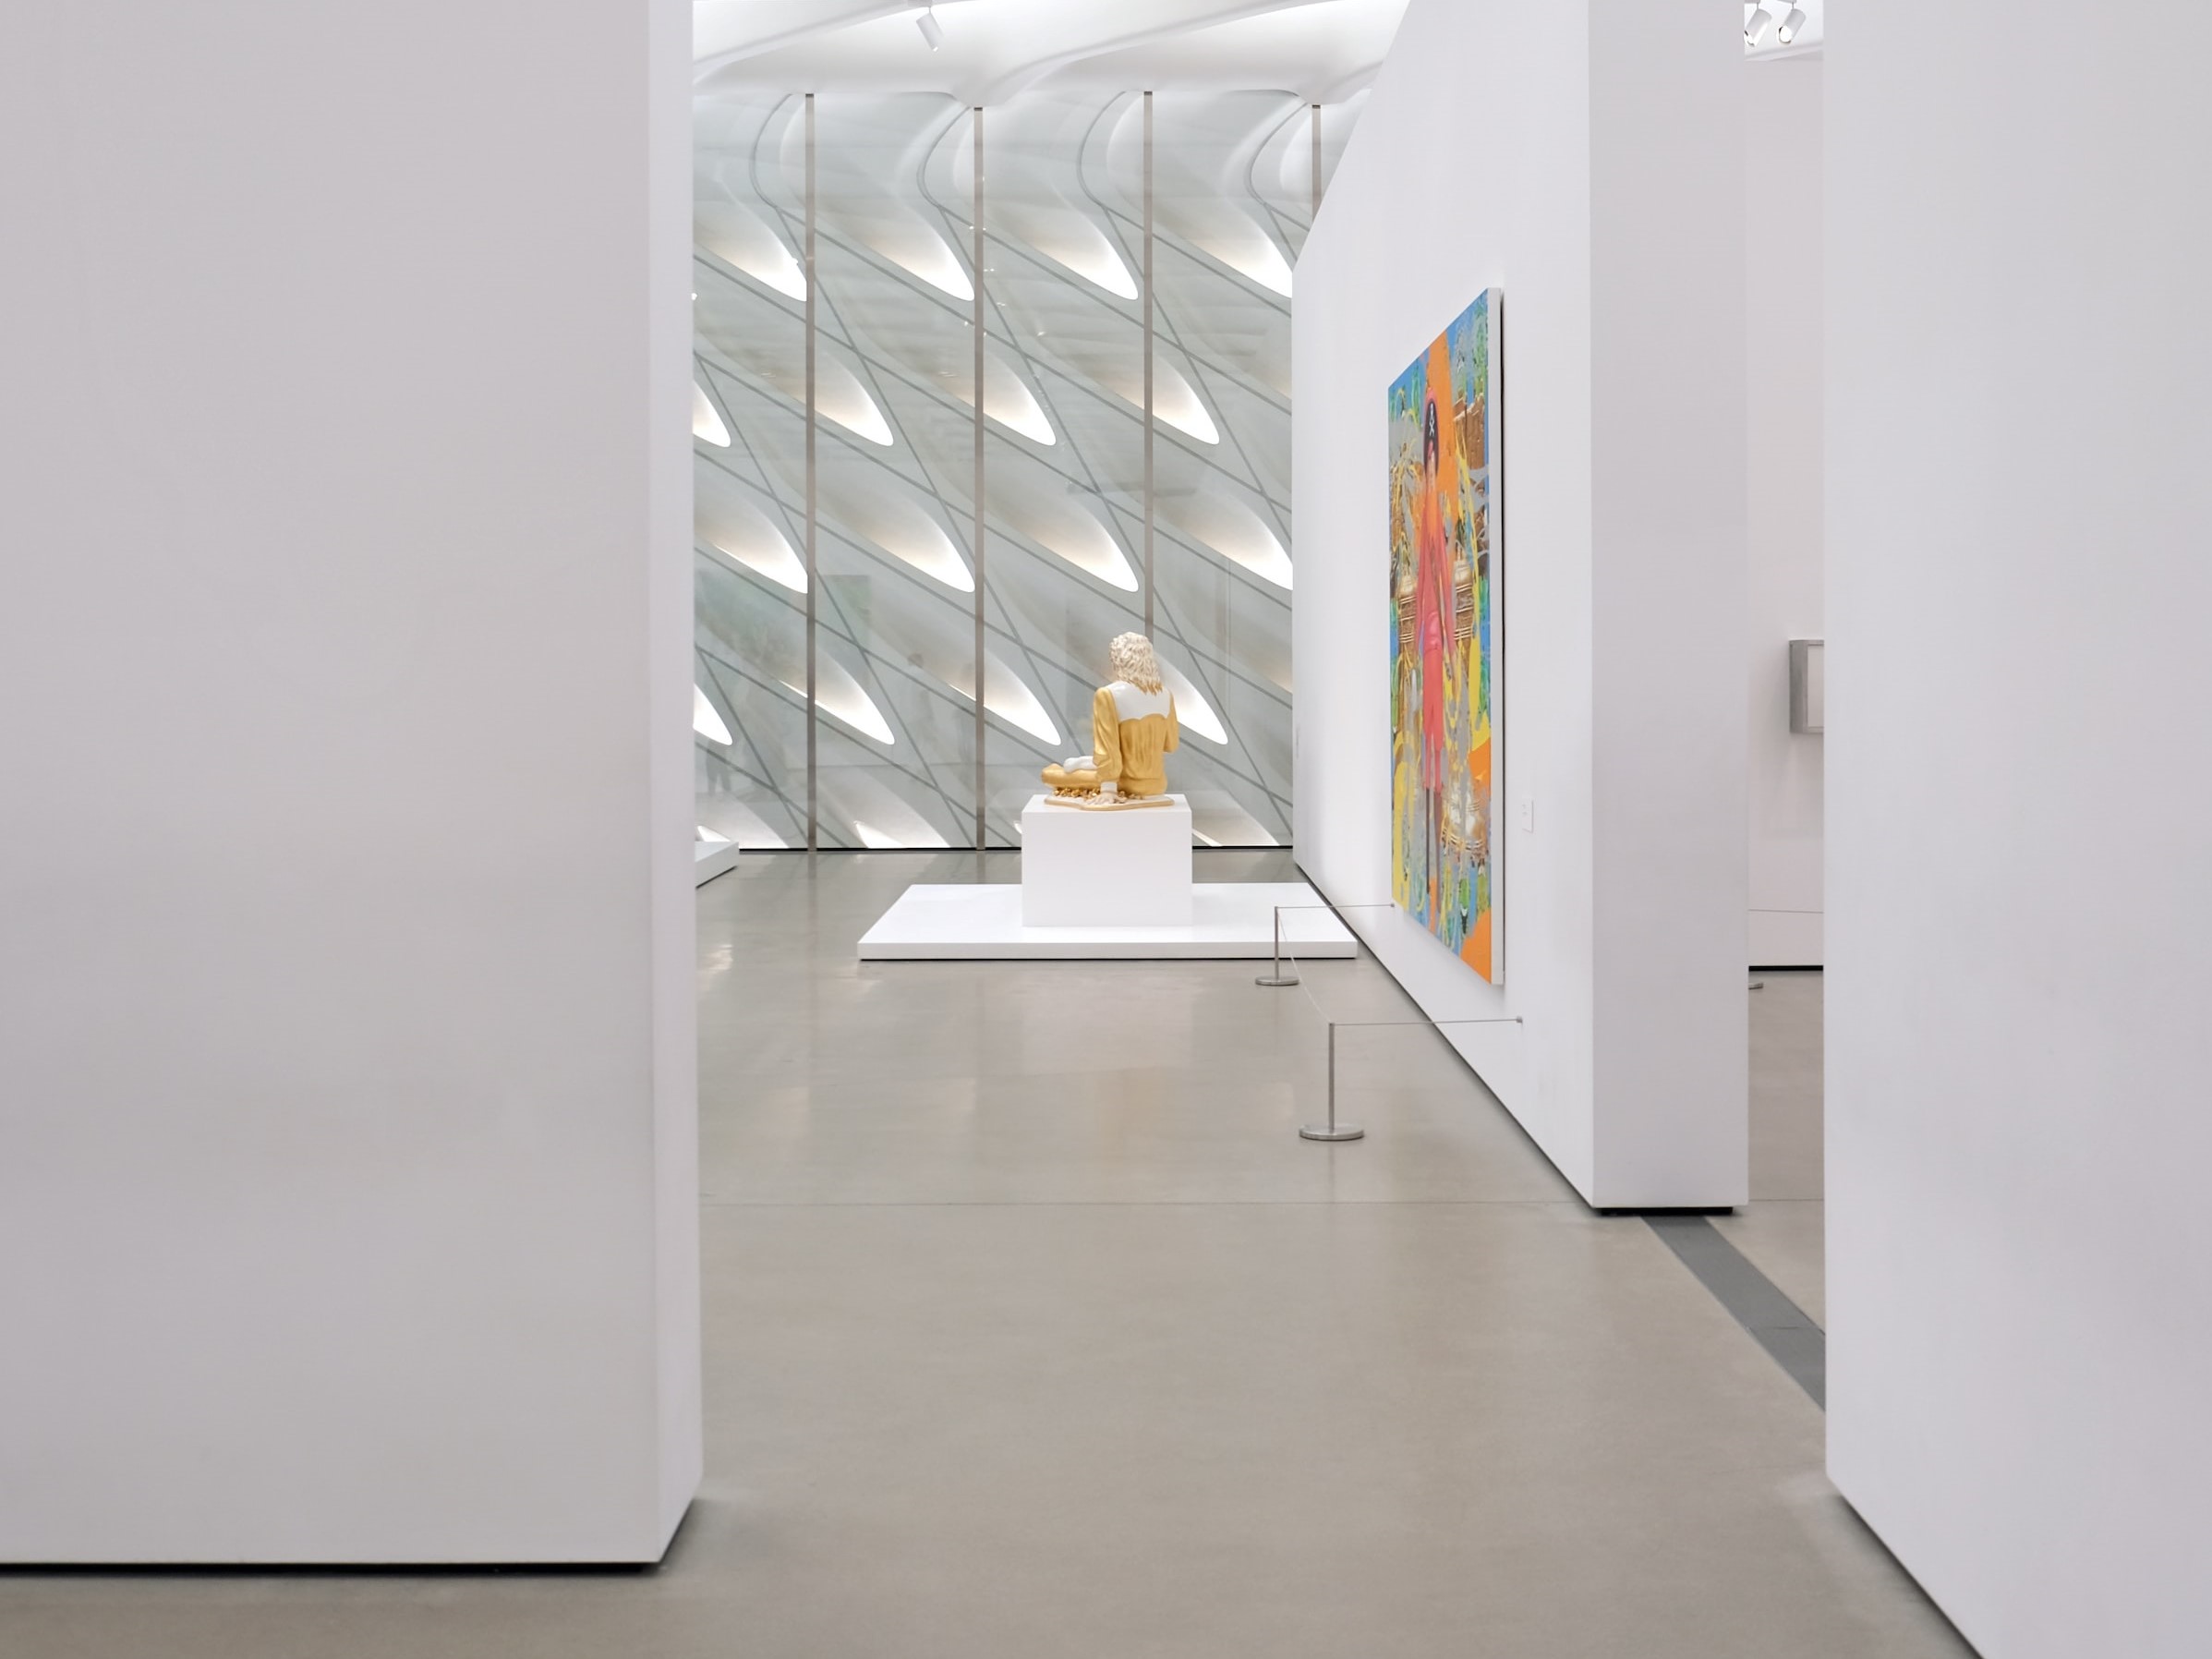 Freestanding Art Barrier 400mm stainless steel finish, in use at the Broad, Los Angeles